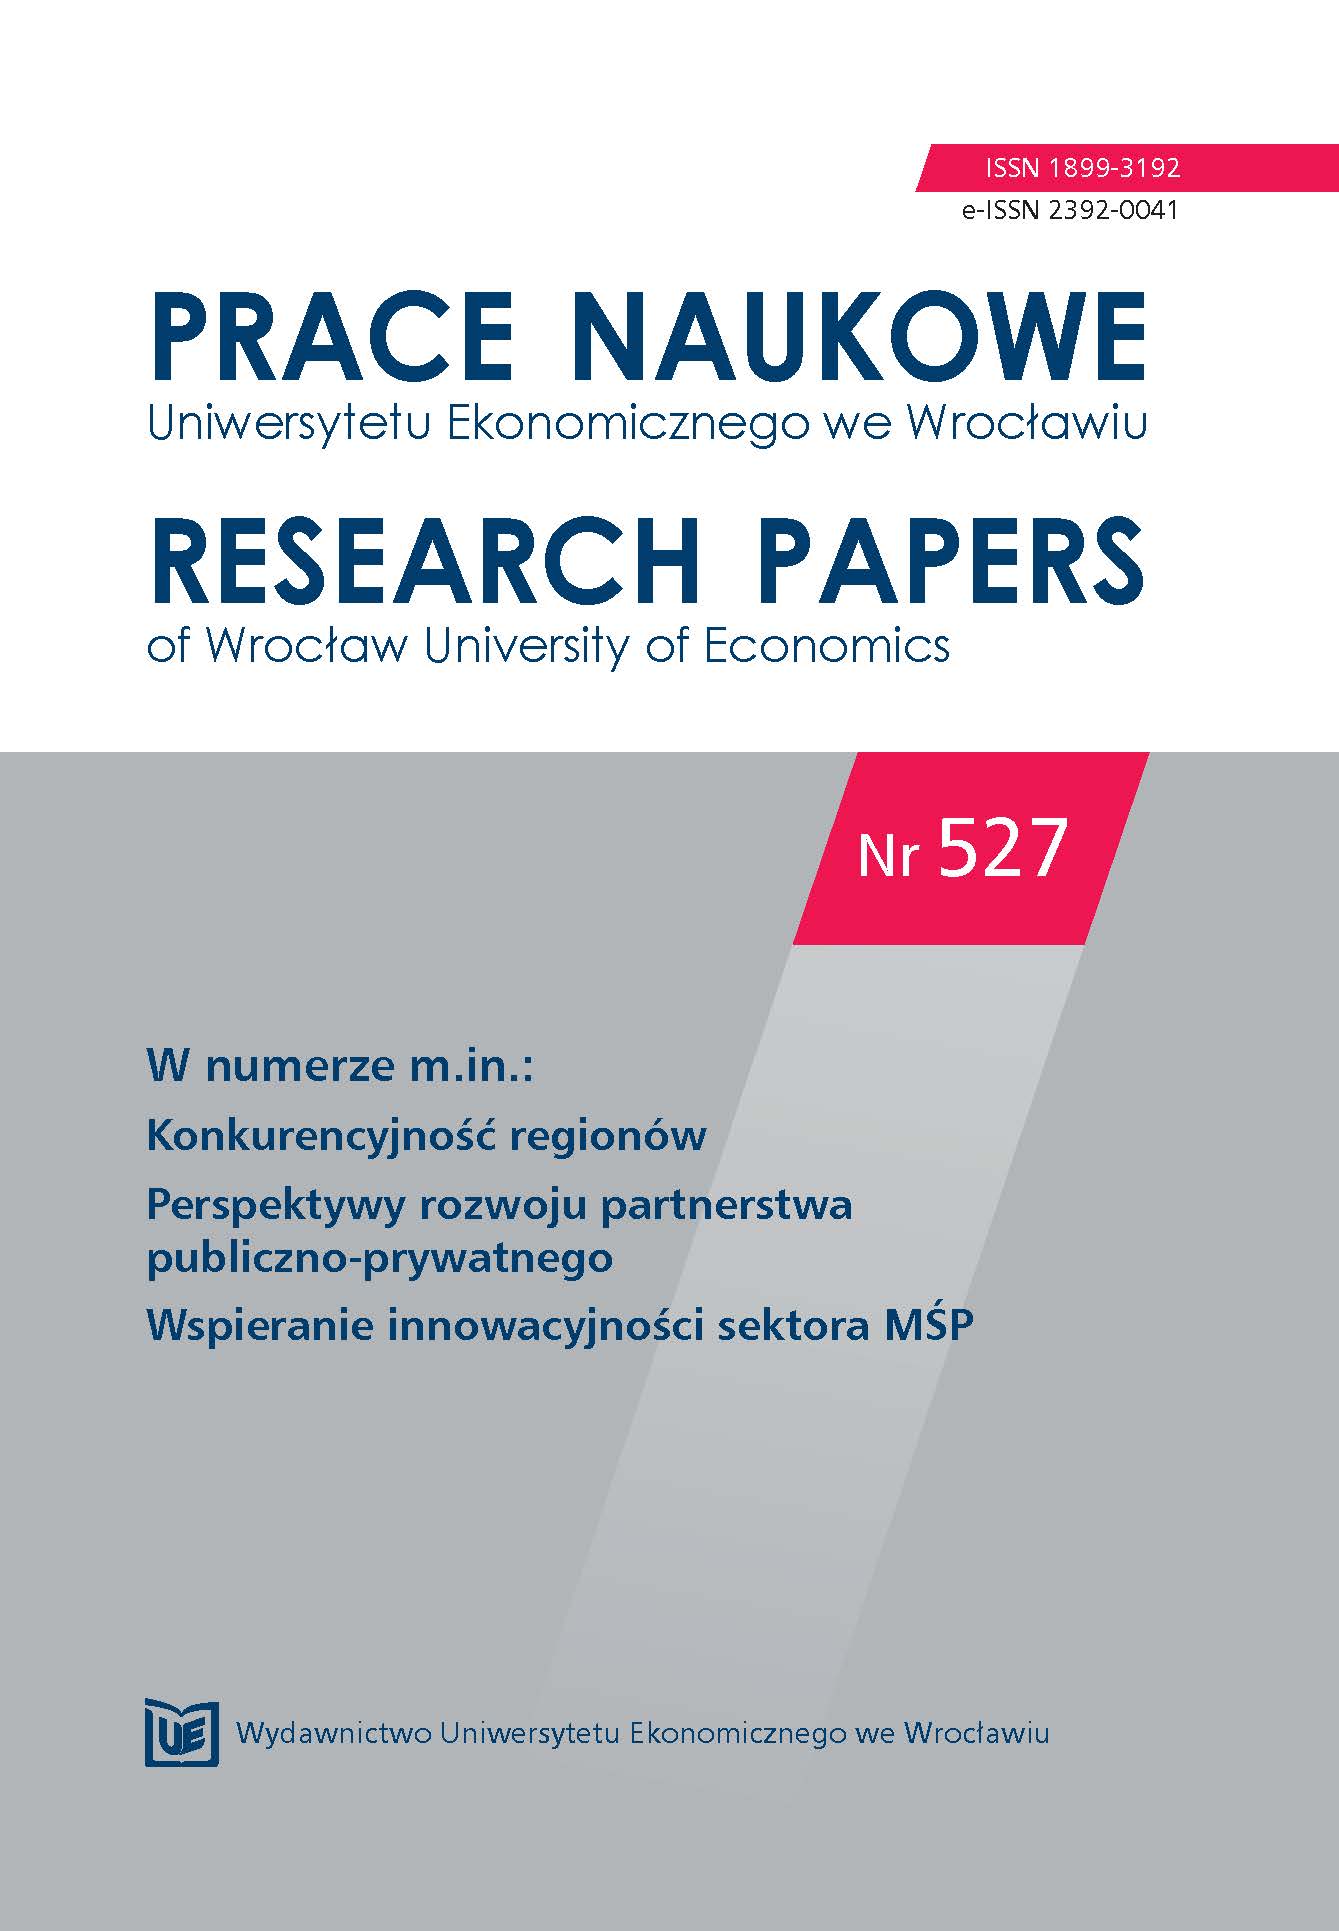 The level of socio-economic development of the districts in Poland Cover Image